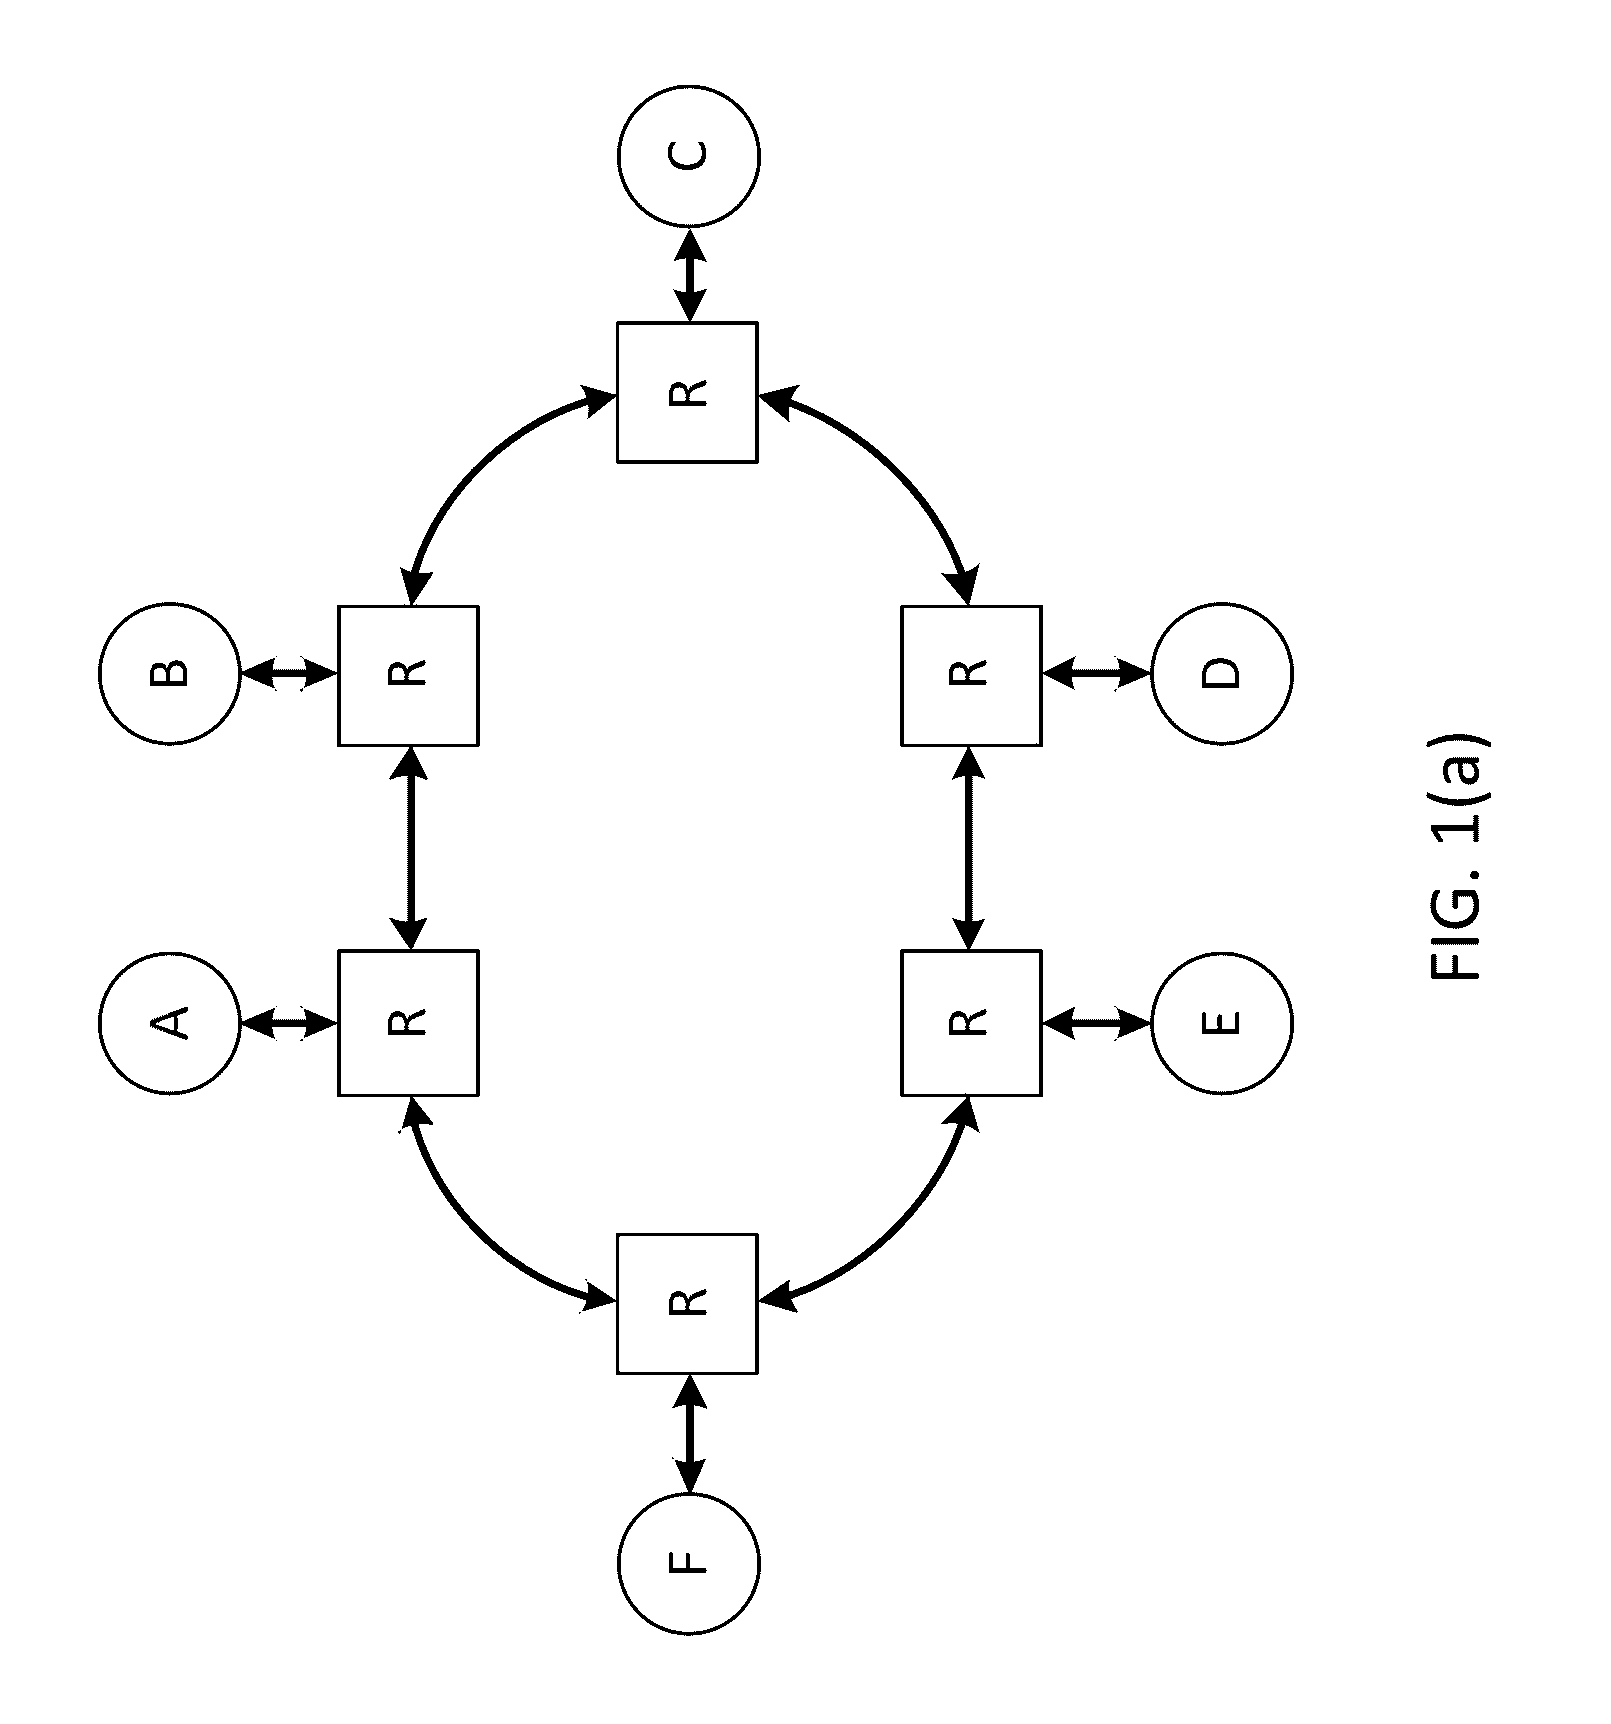 Hardware and software enabled implementation of power profile management instructions in system on chip